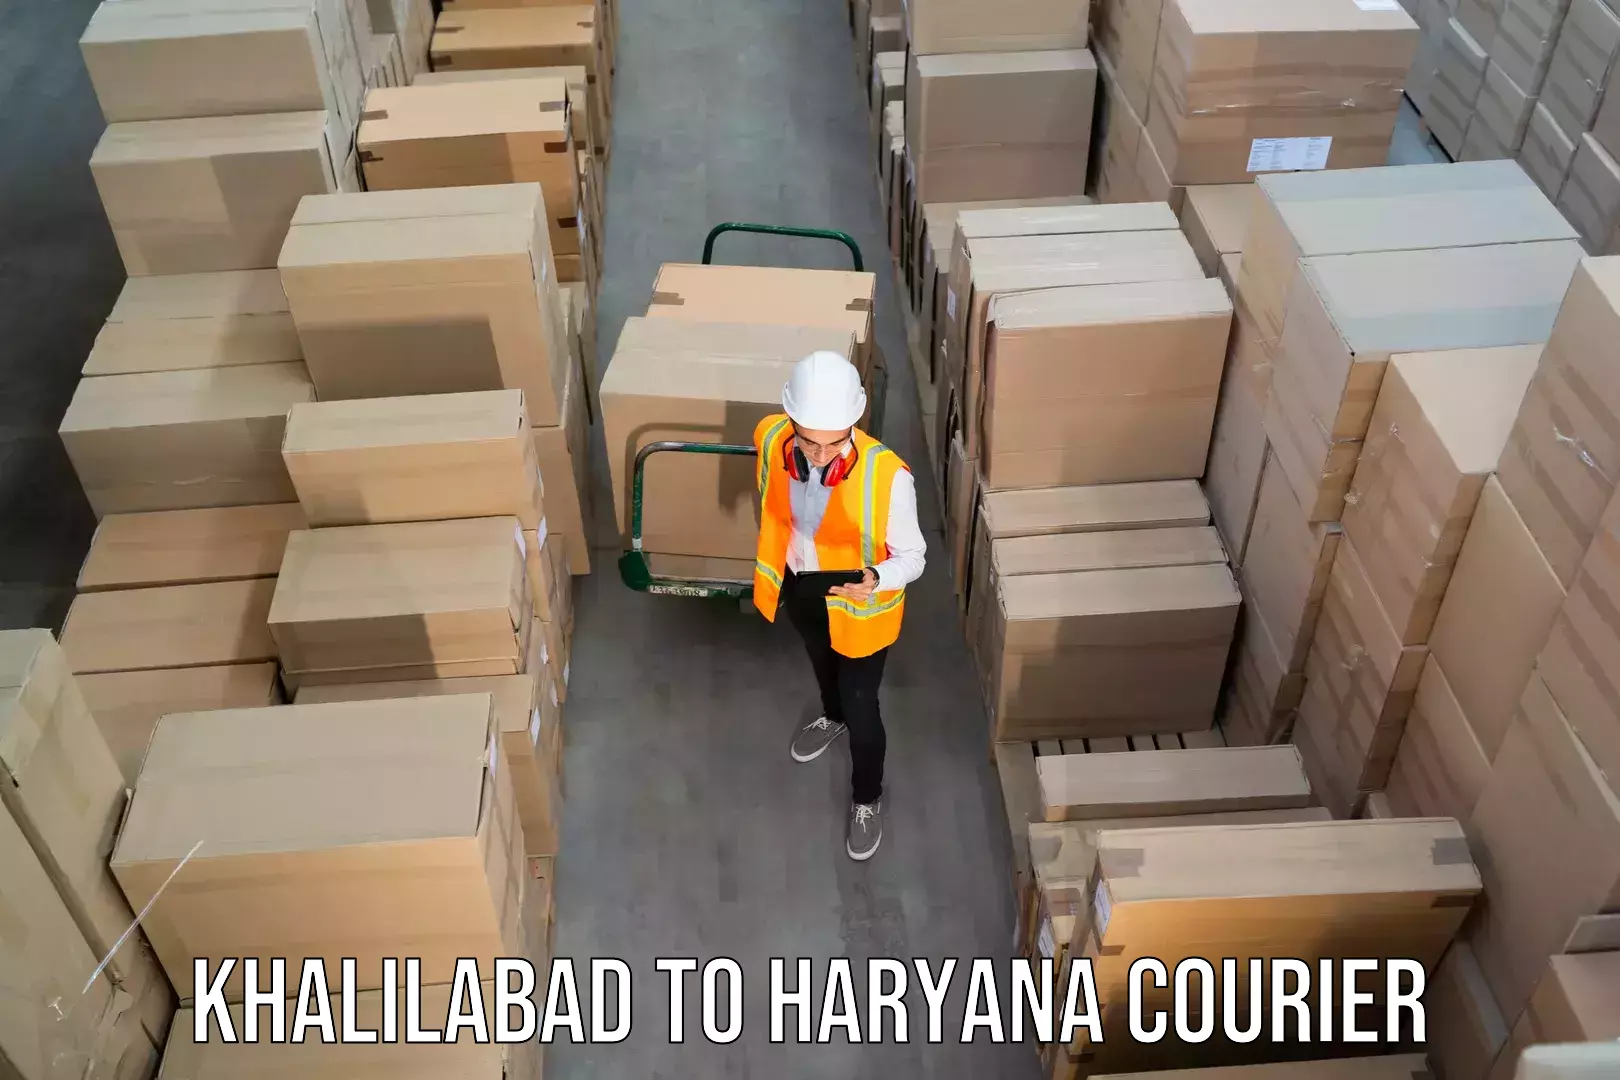 Courier service booking Khalilabad to Haryana